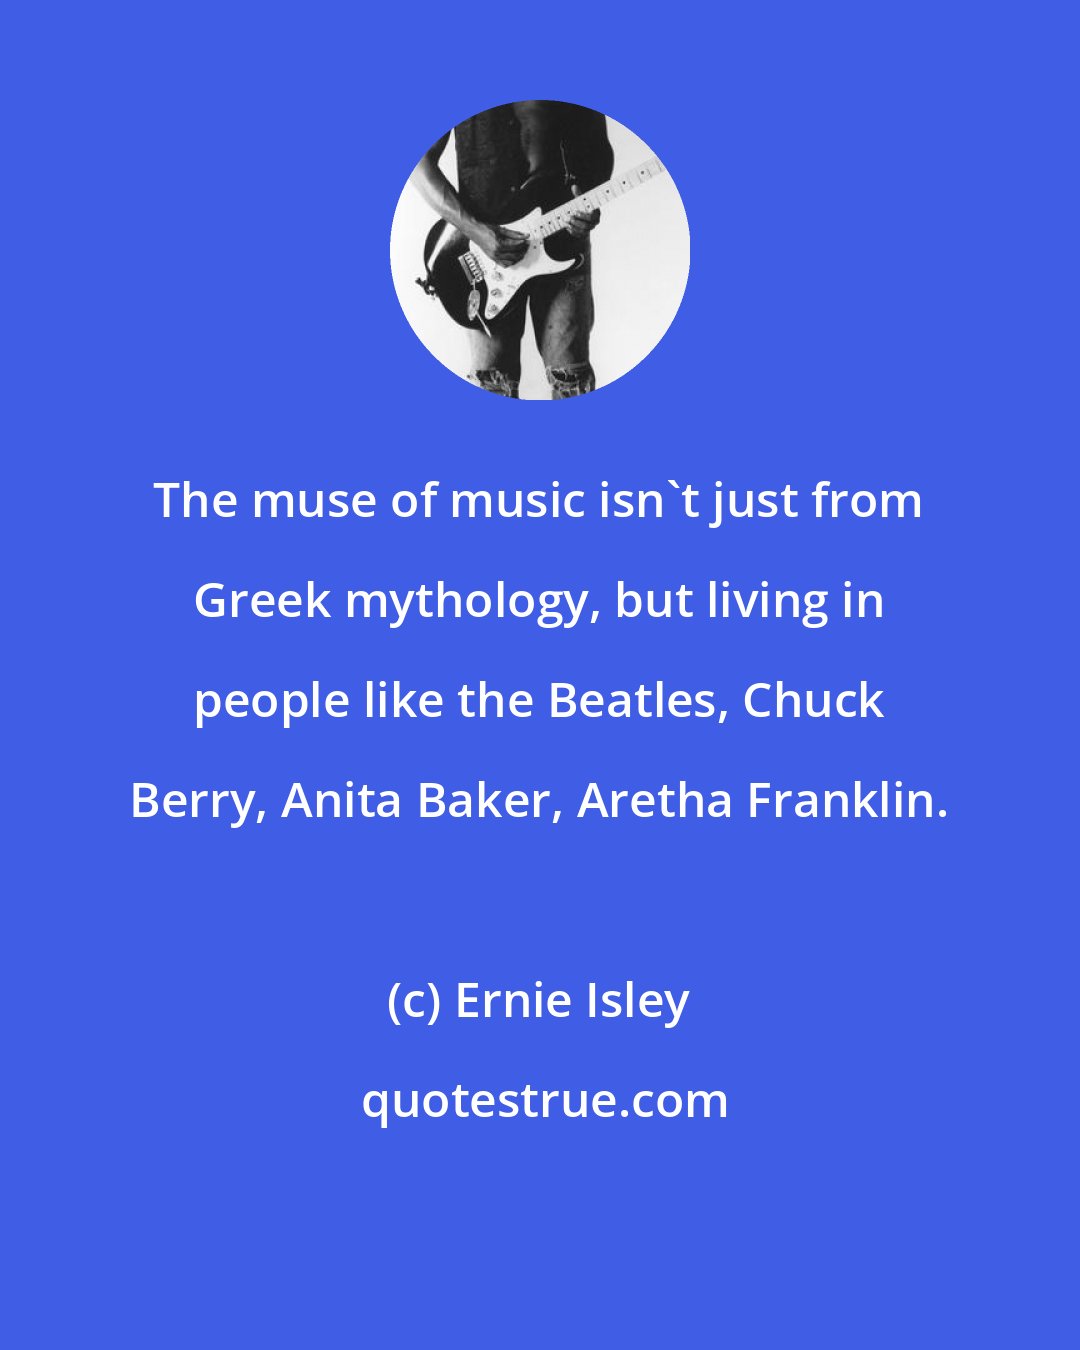 Ernie Isley: The muse of music isn't just from Greek mythology, but living in people like the Beatles, Chuck Berry, Anita Baker, Aretha Franklin.